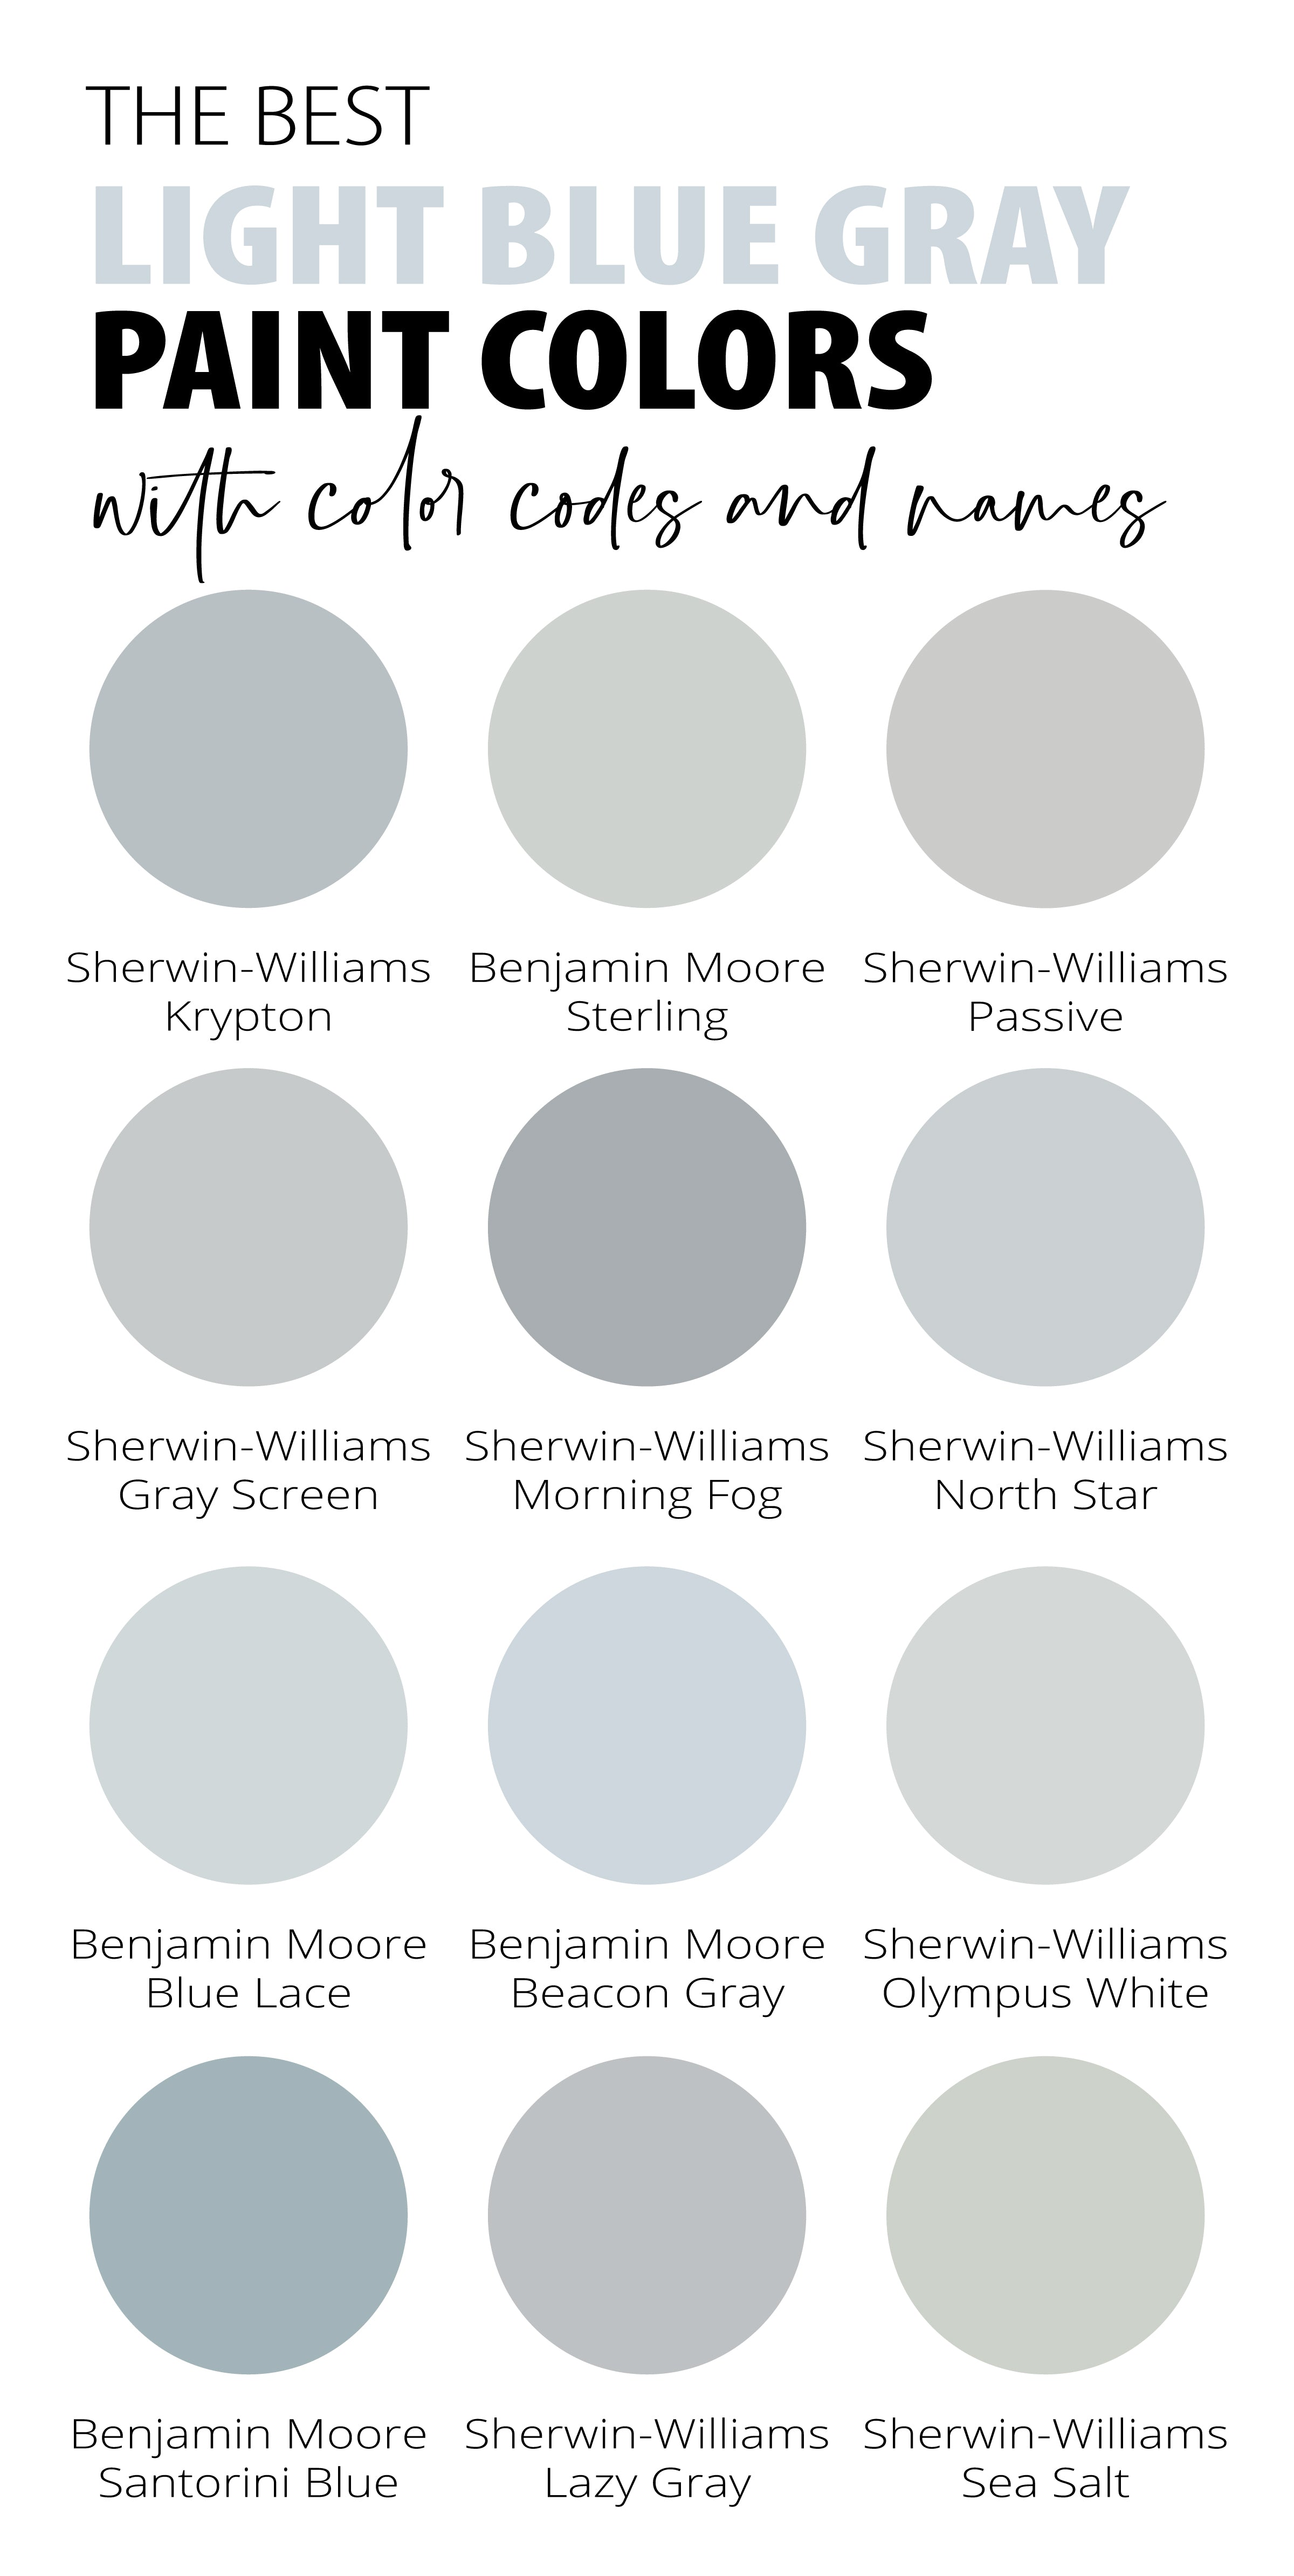 Best-Light-Blue-Gray-Paint-Colors-with-Names